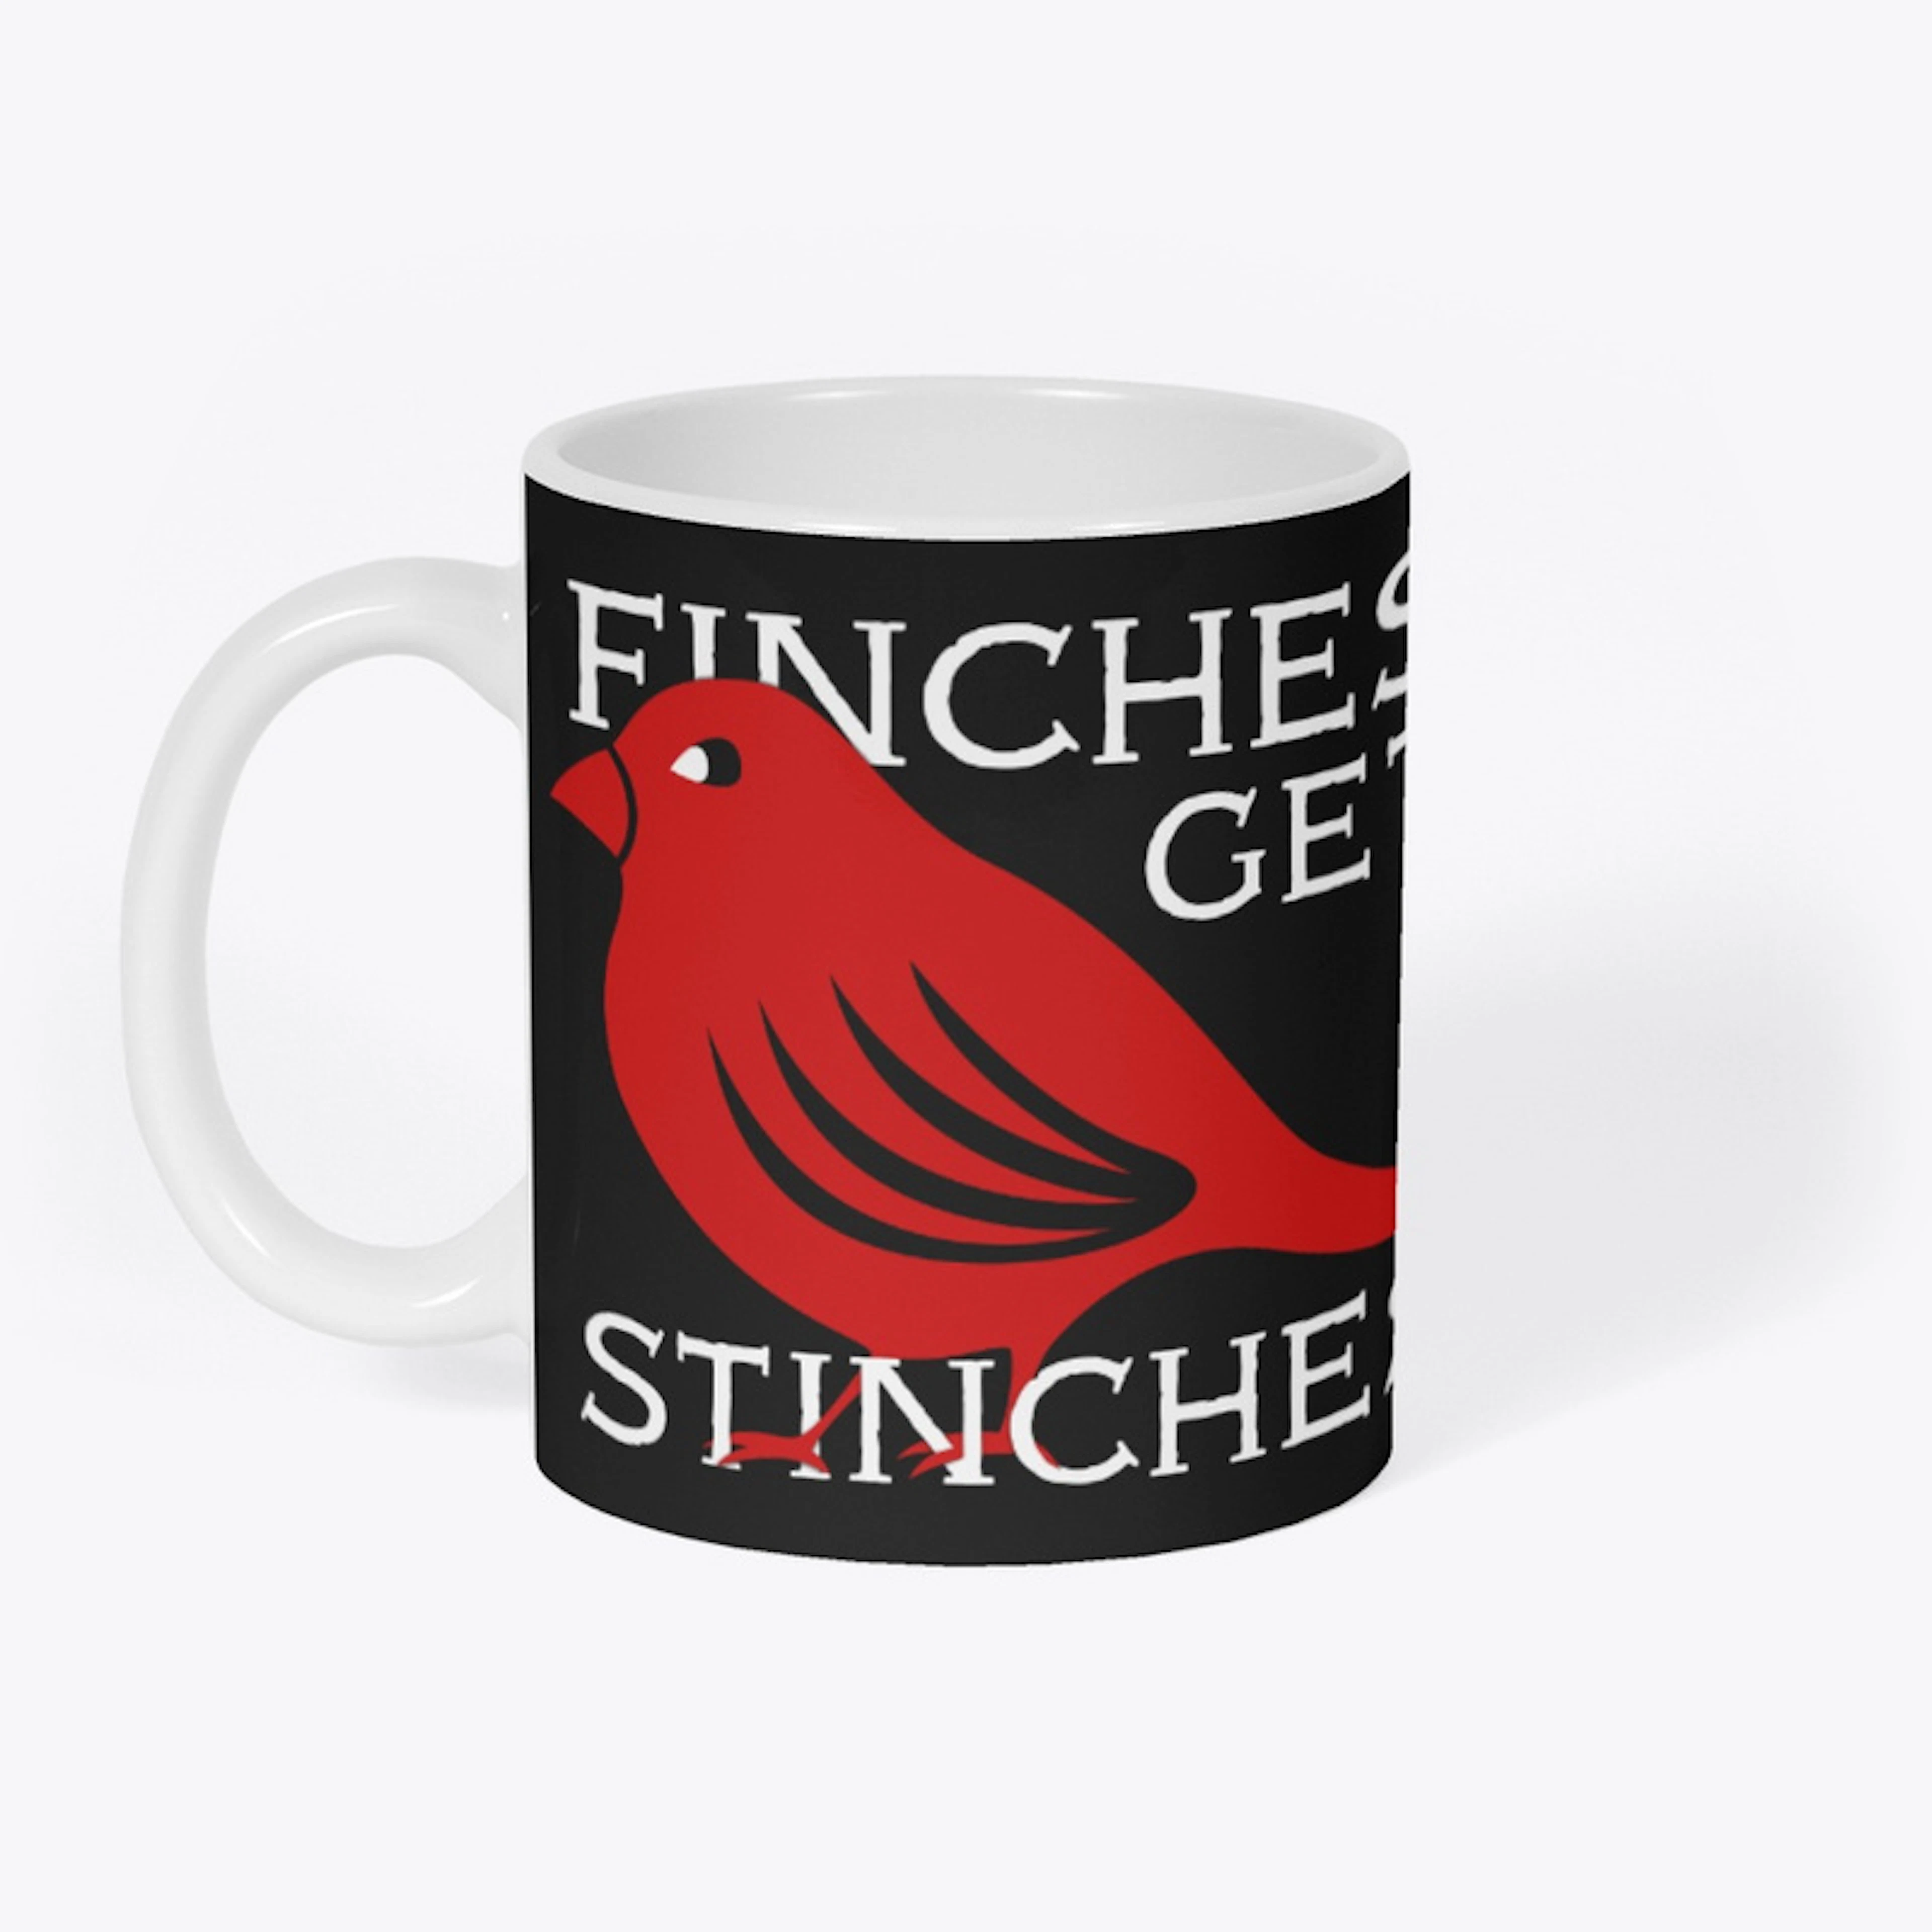 Finches Get Stinches